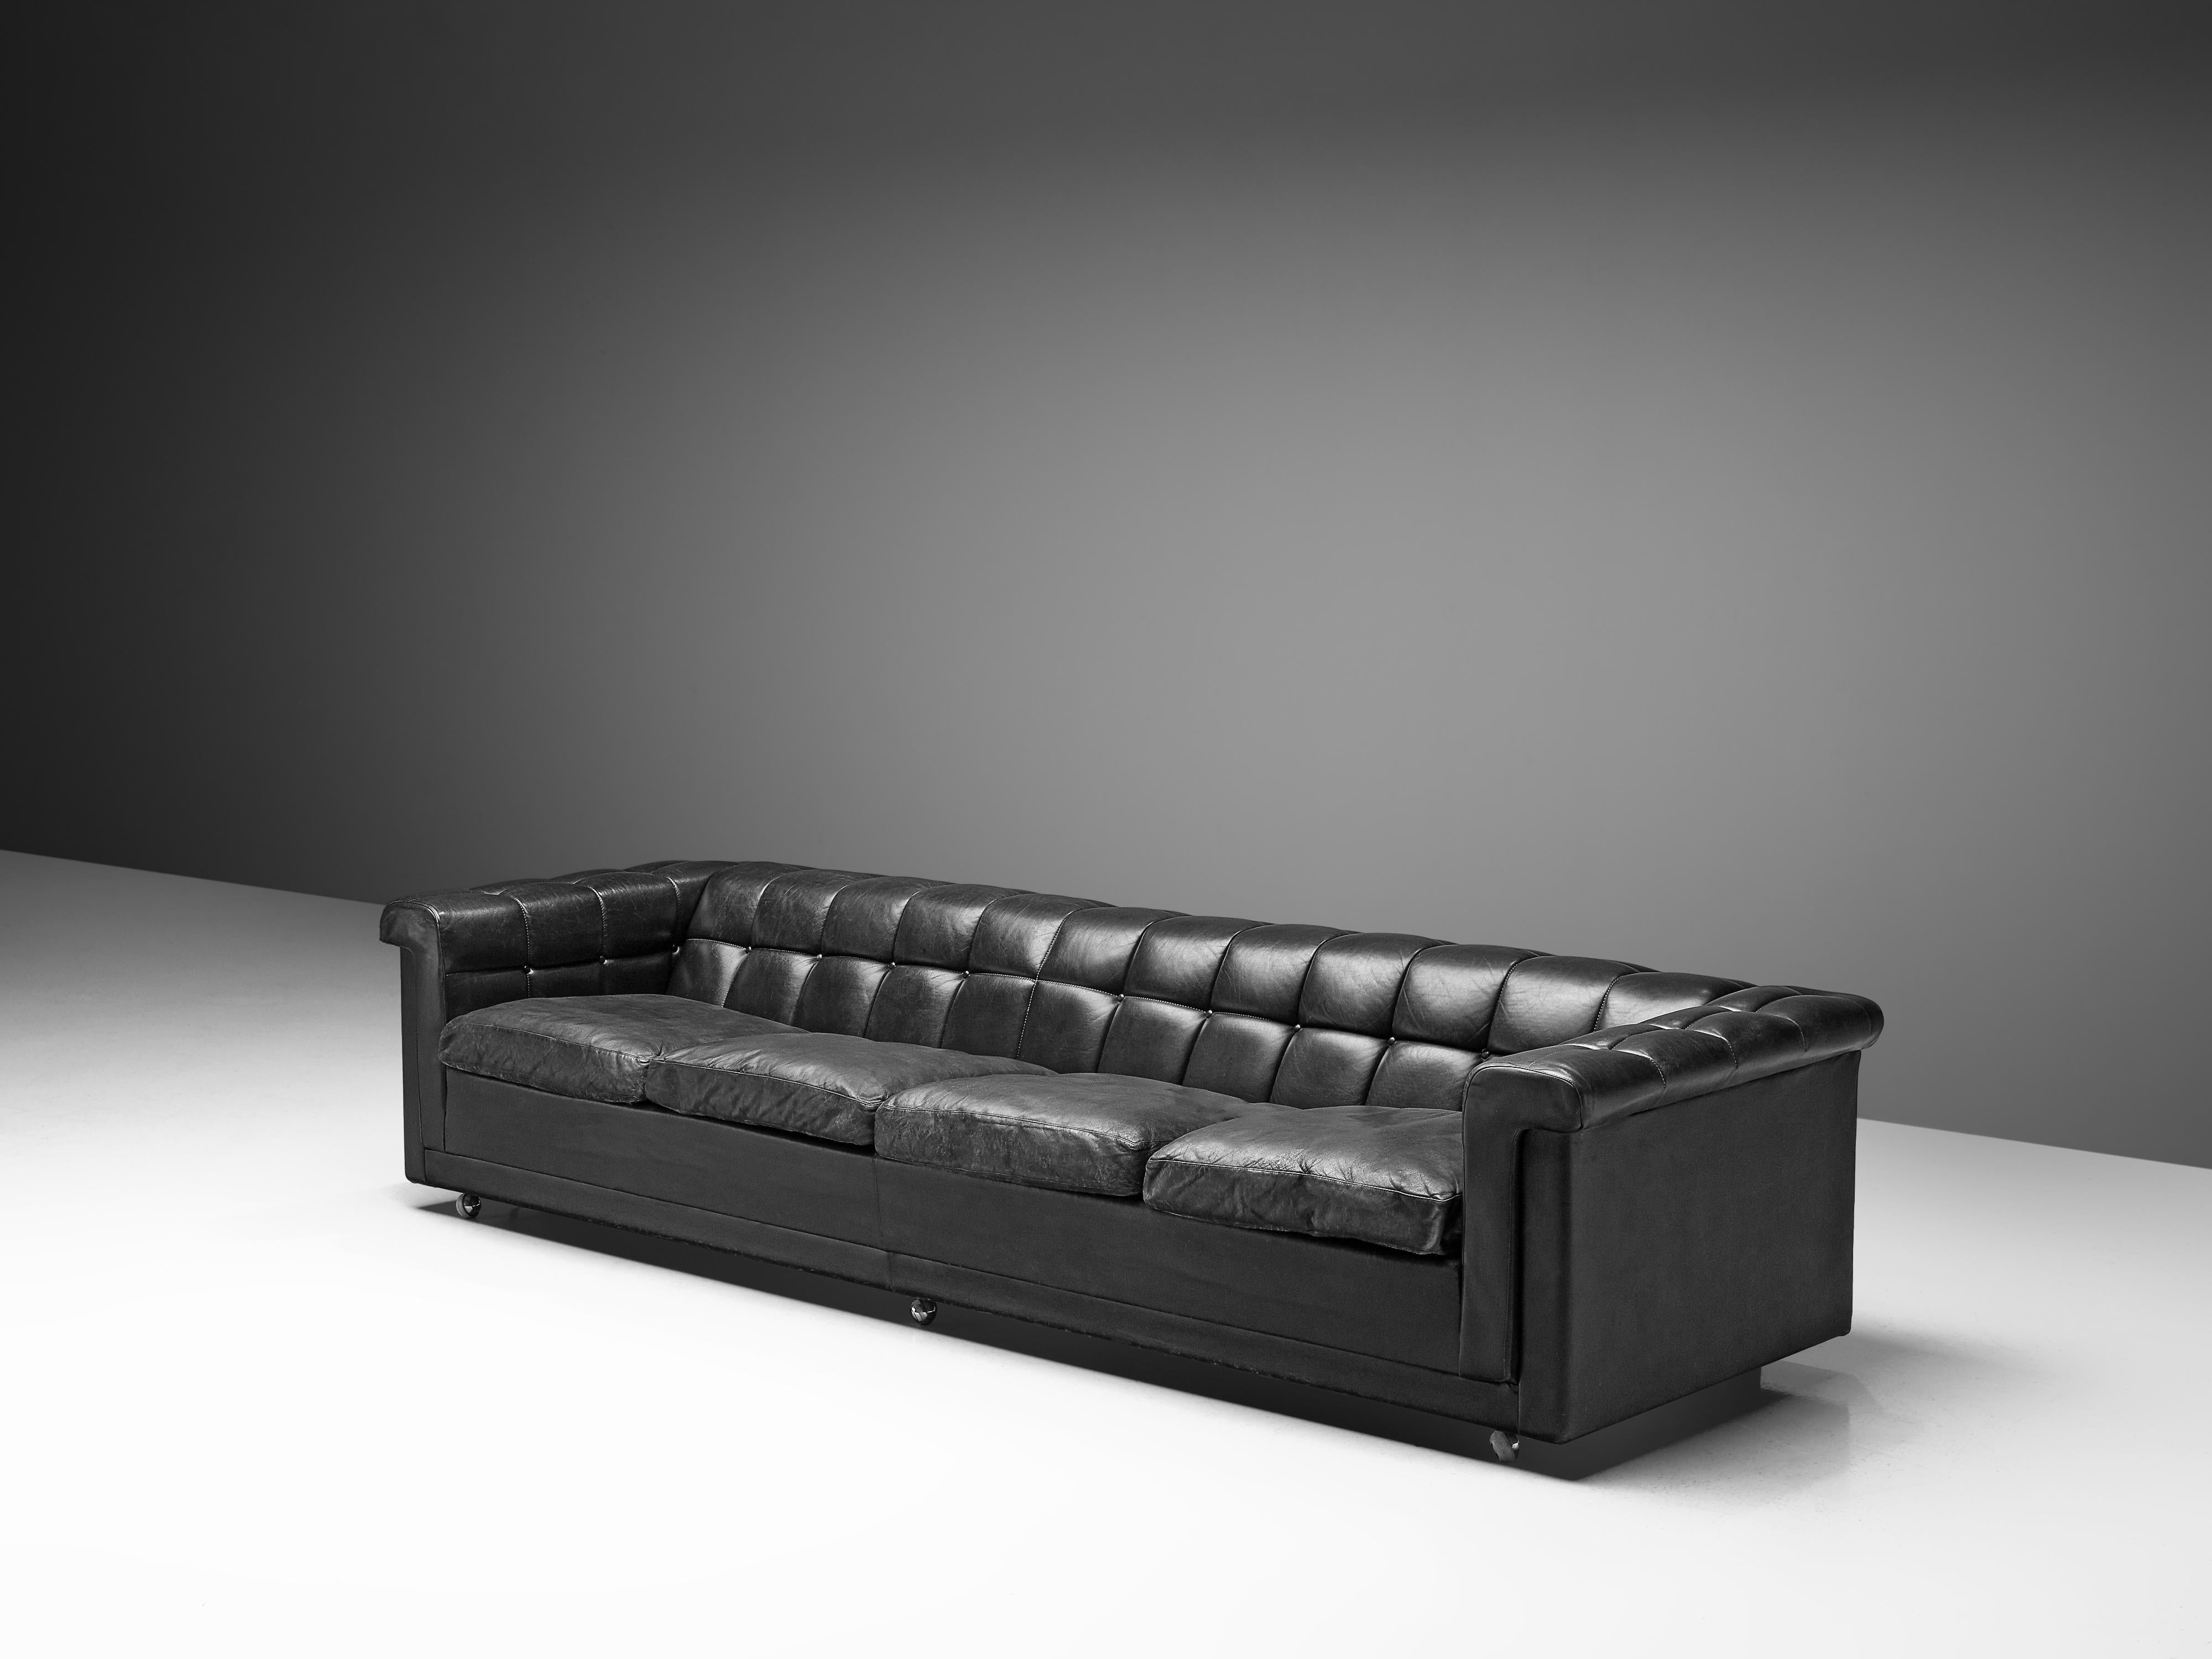 Edward Wormley four-seat sofa model 5407, leather, metal, United States, 1970s

This sofa in black leather has an interesting appearance of a Classic Chesterfield sofa with a modern aesthetics. The outside is tight and sleek. The patinated black